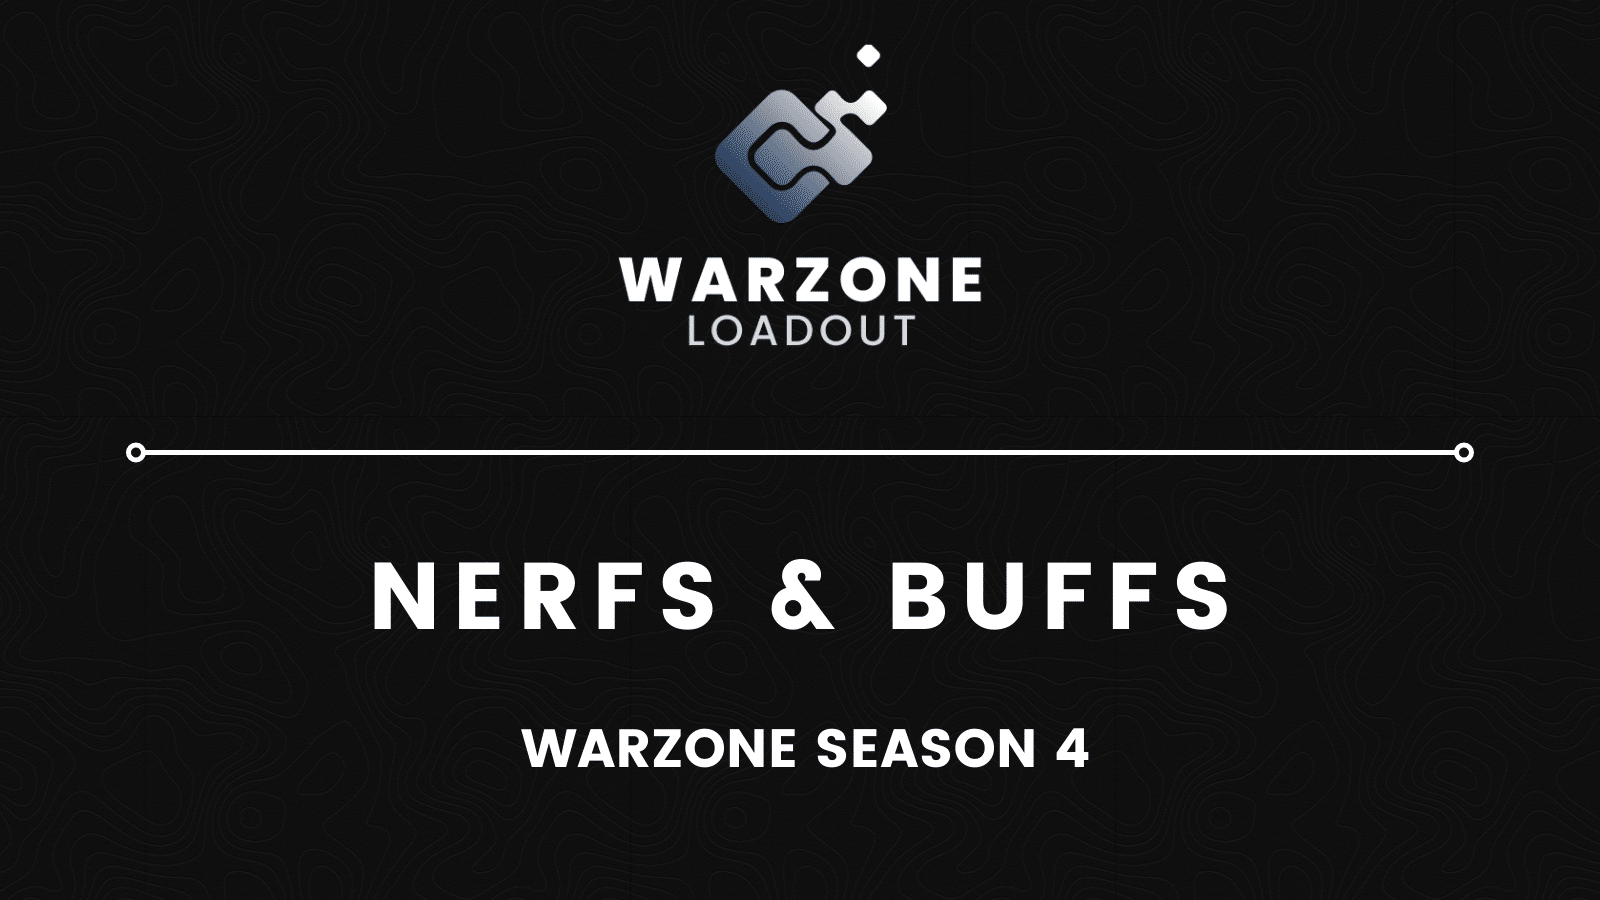 All nerfs and buffs of Warzone season 4